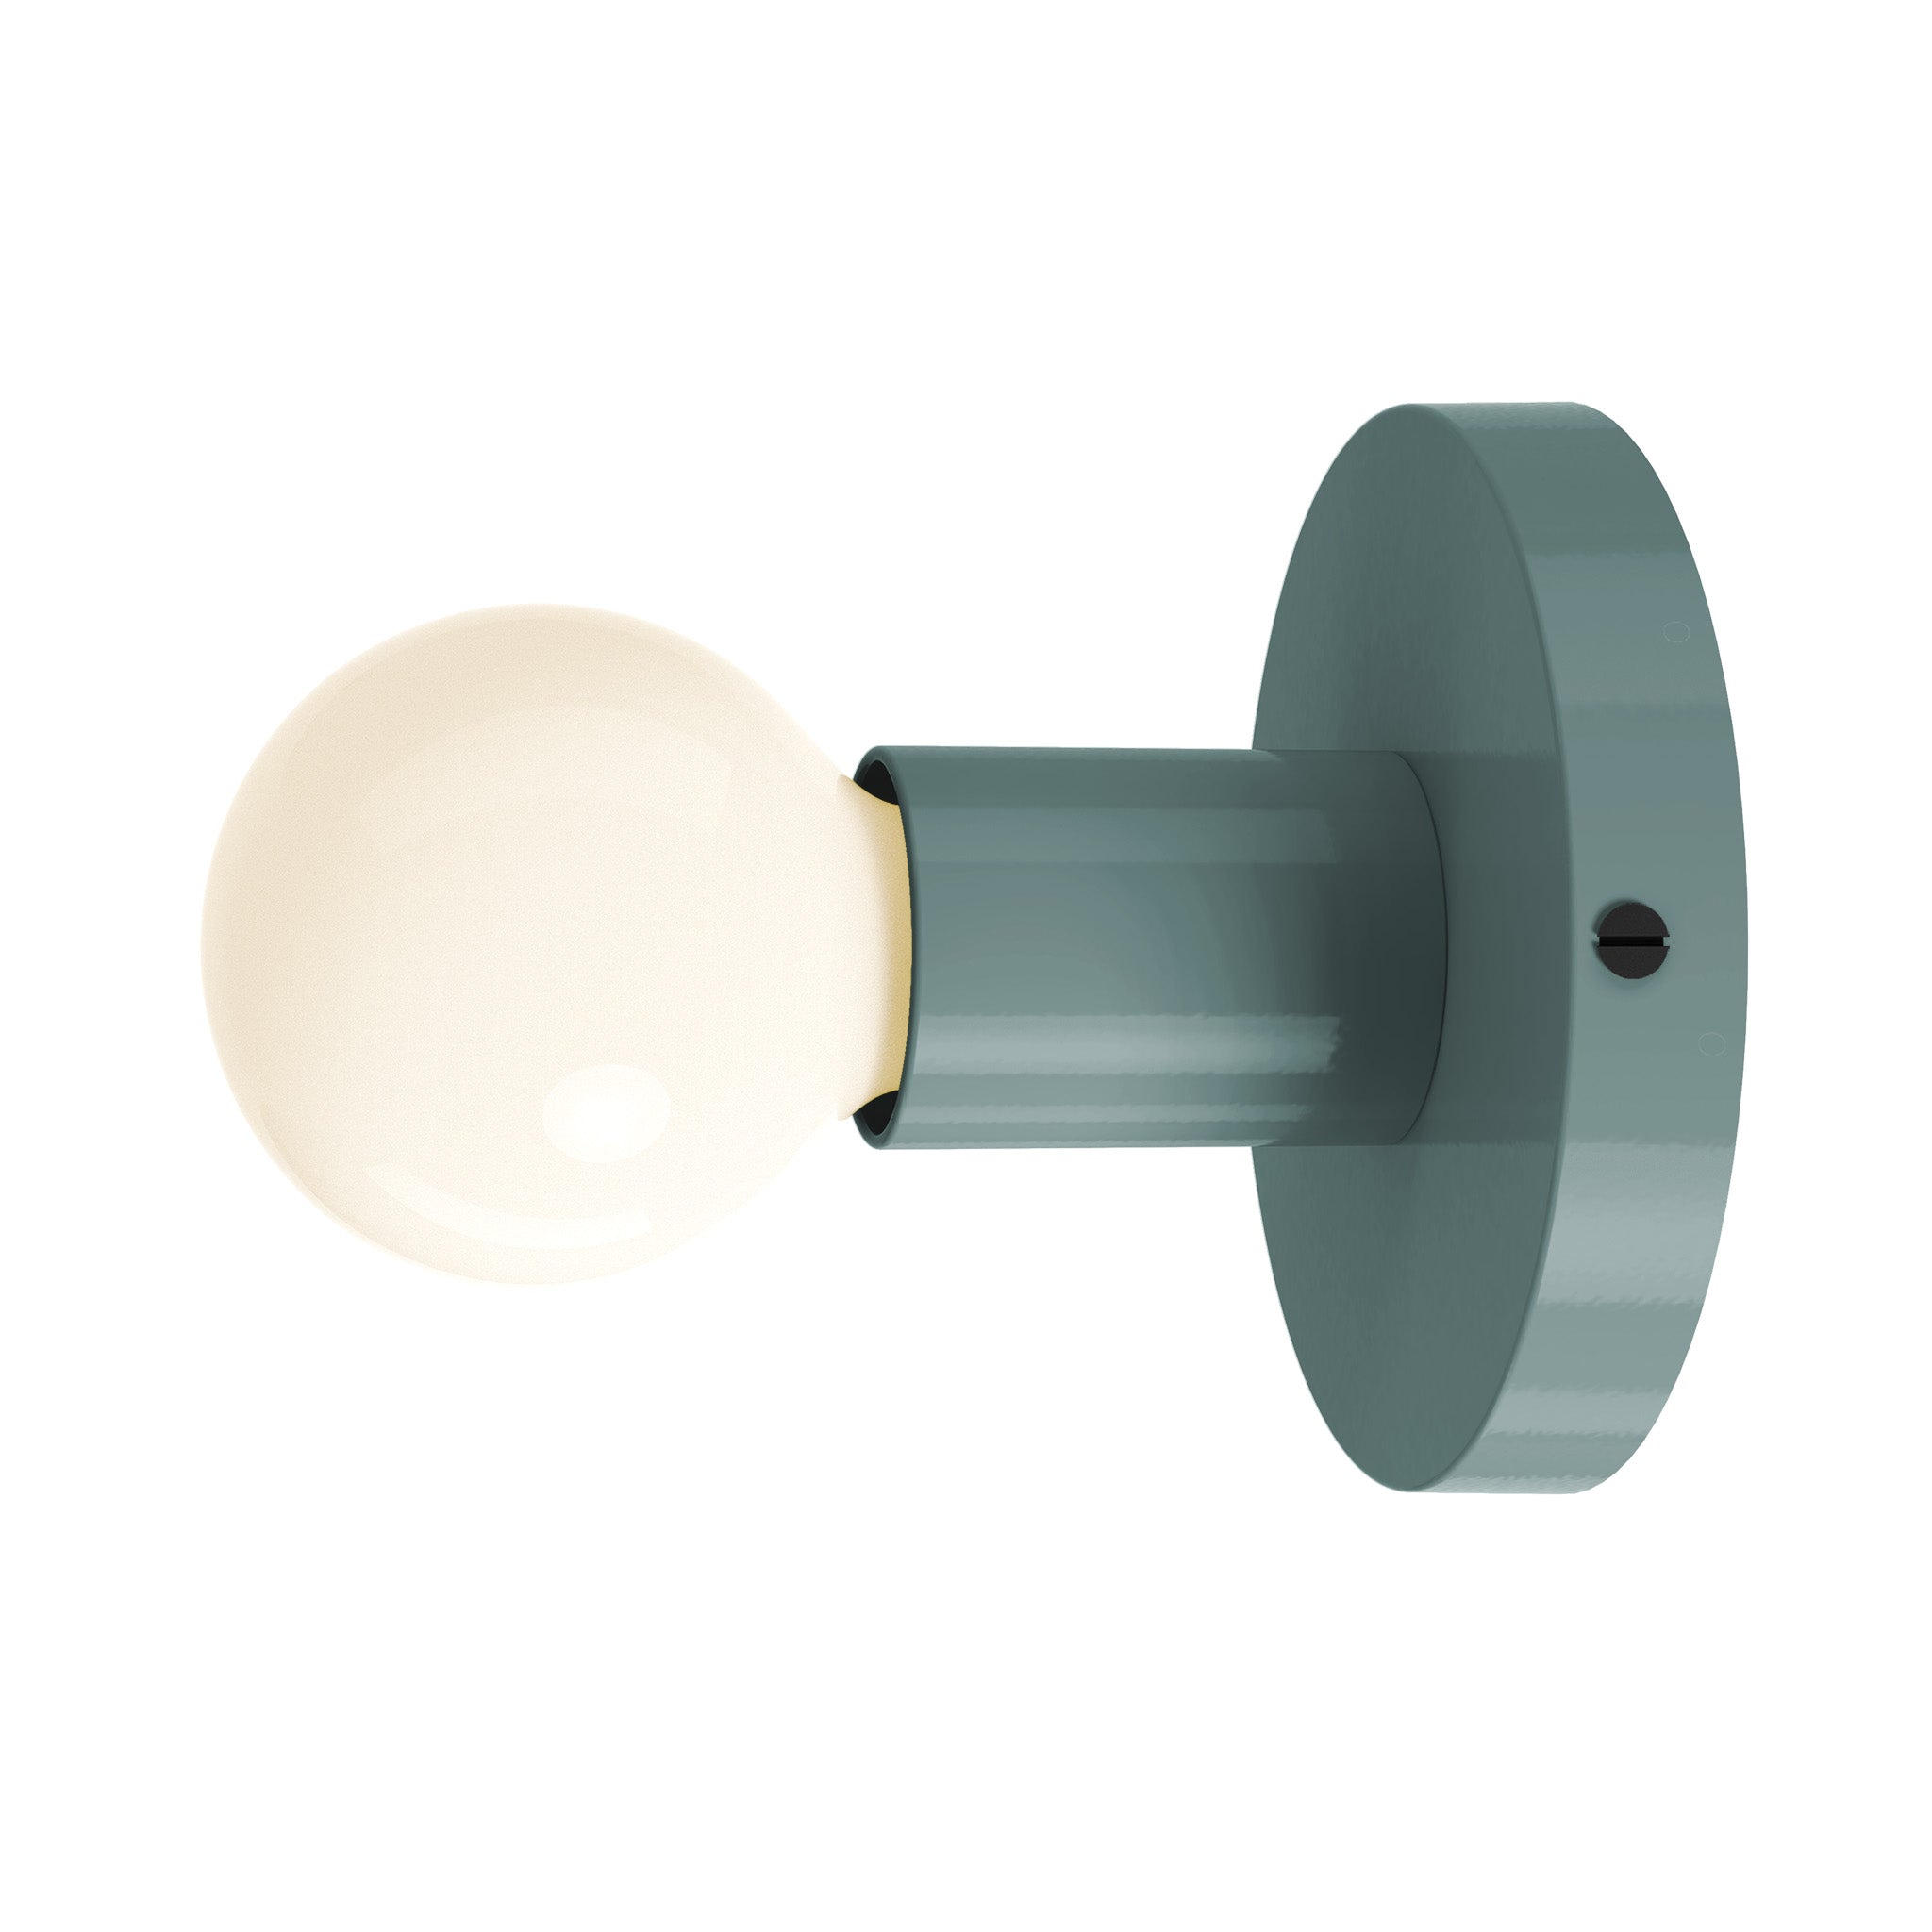 black lagoon color twink sconce dutton brown lighting